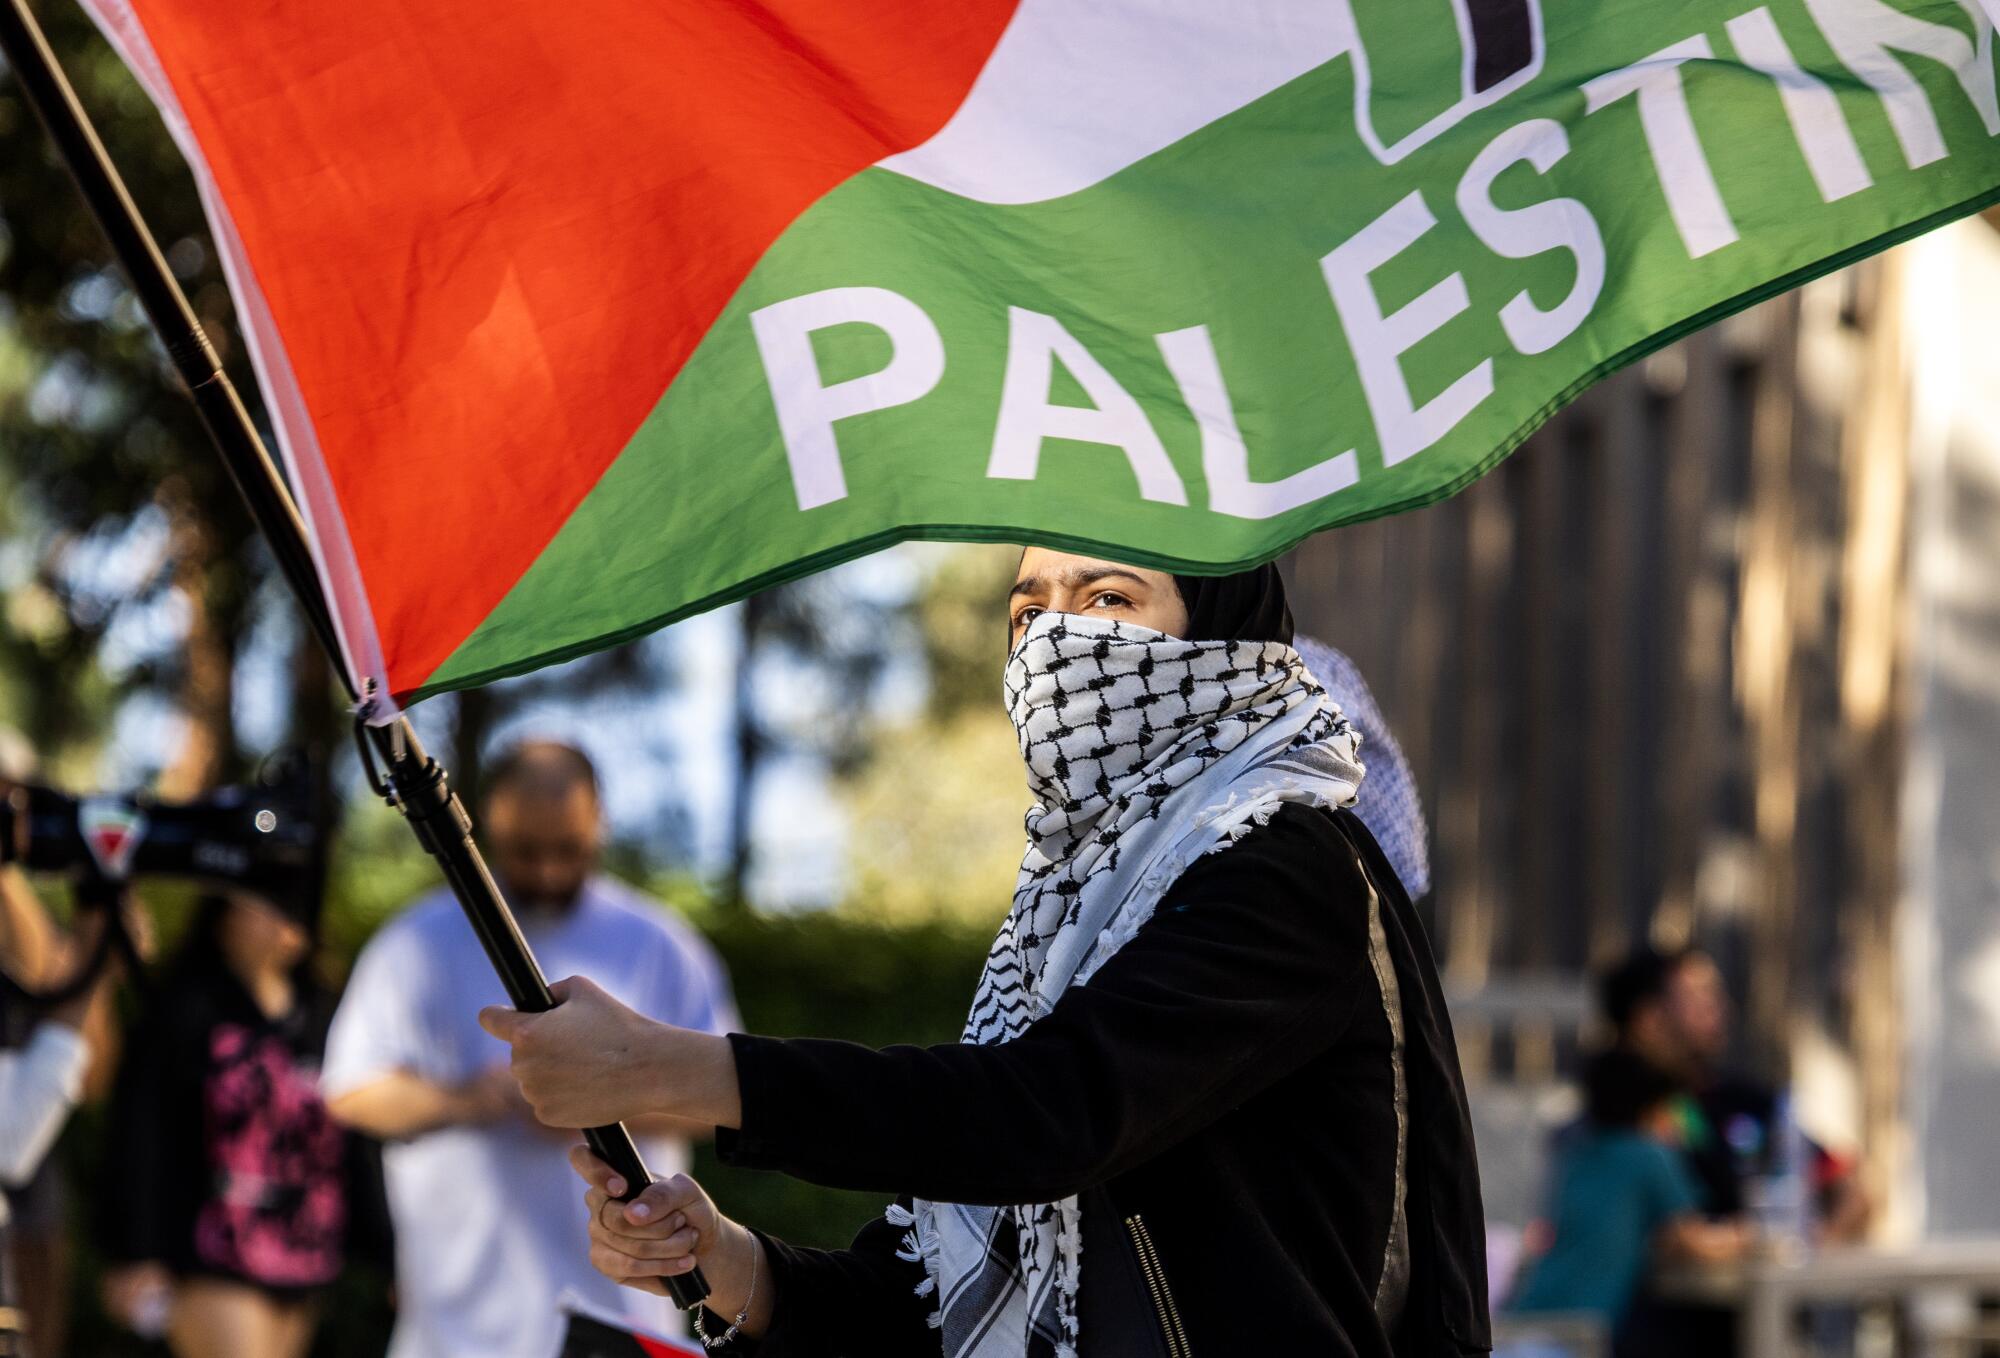 A protester carries a Palestinian flag at UC Irvine.